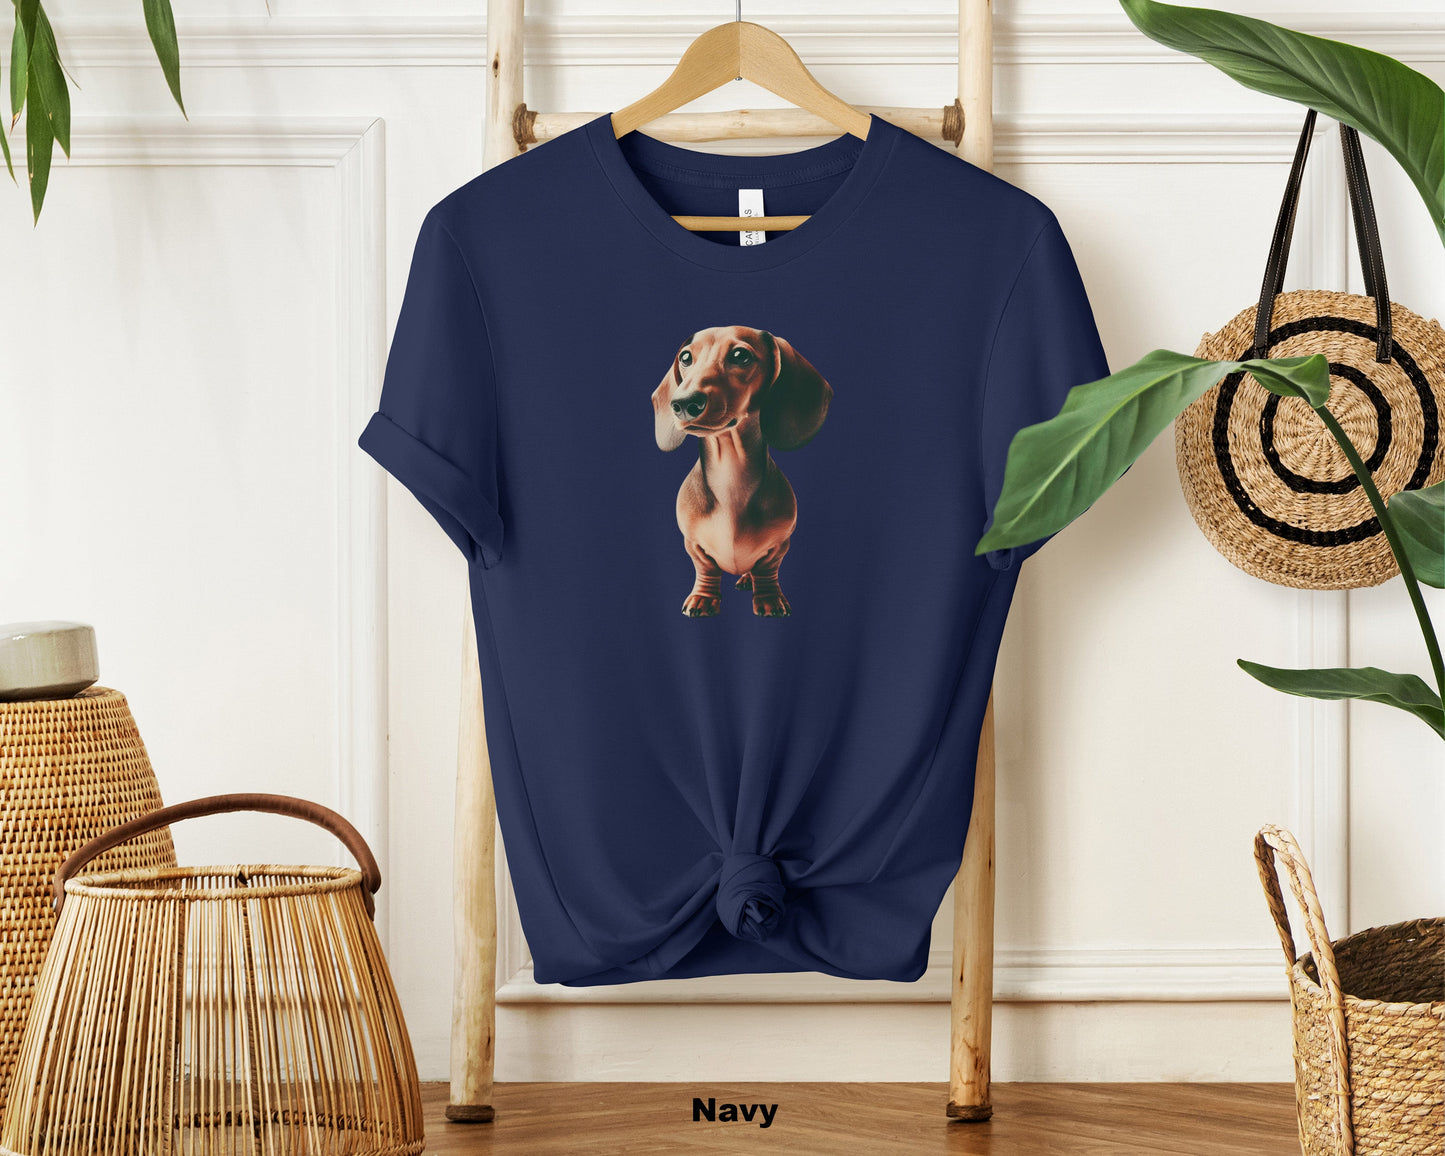 "Adorable Dachshund Dog Print Soft Cotton Unisex T-Shirt for Pet Lovers"